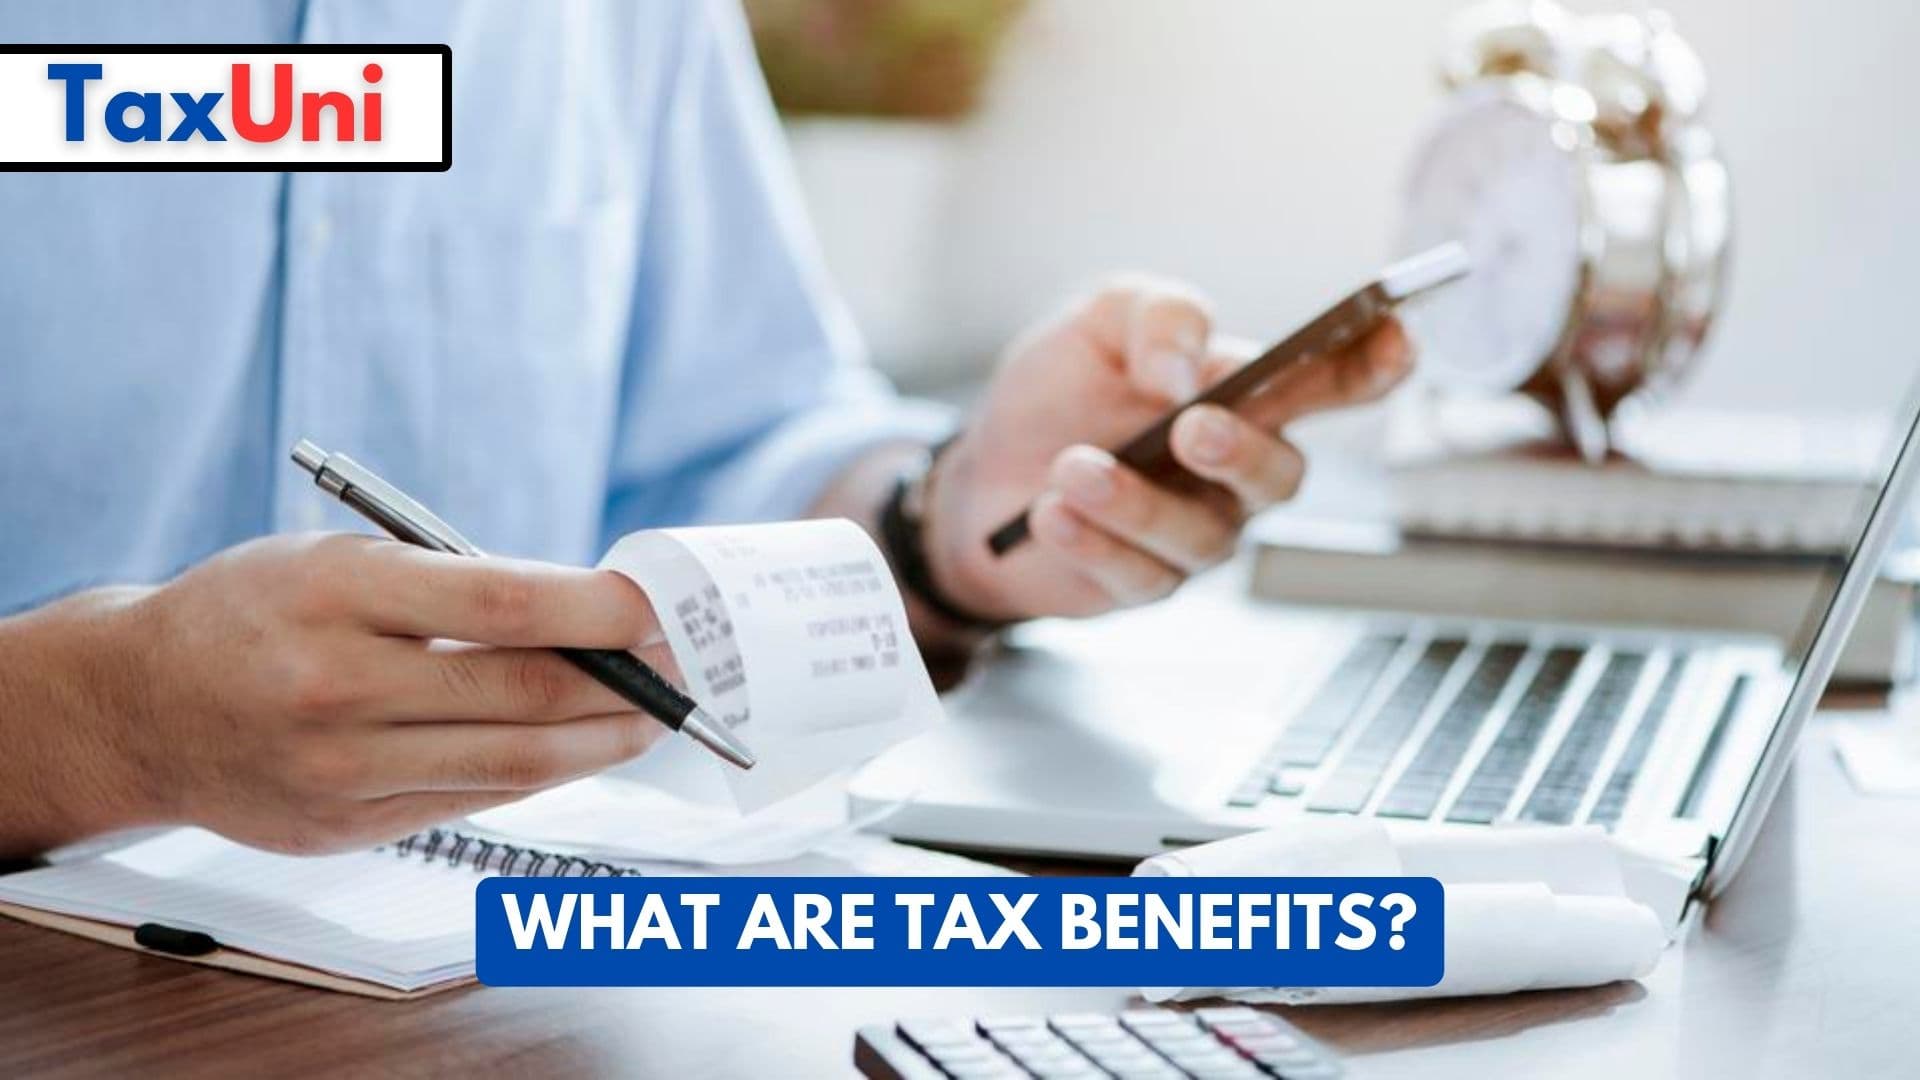 How to take advantage of tax benefits?